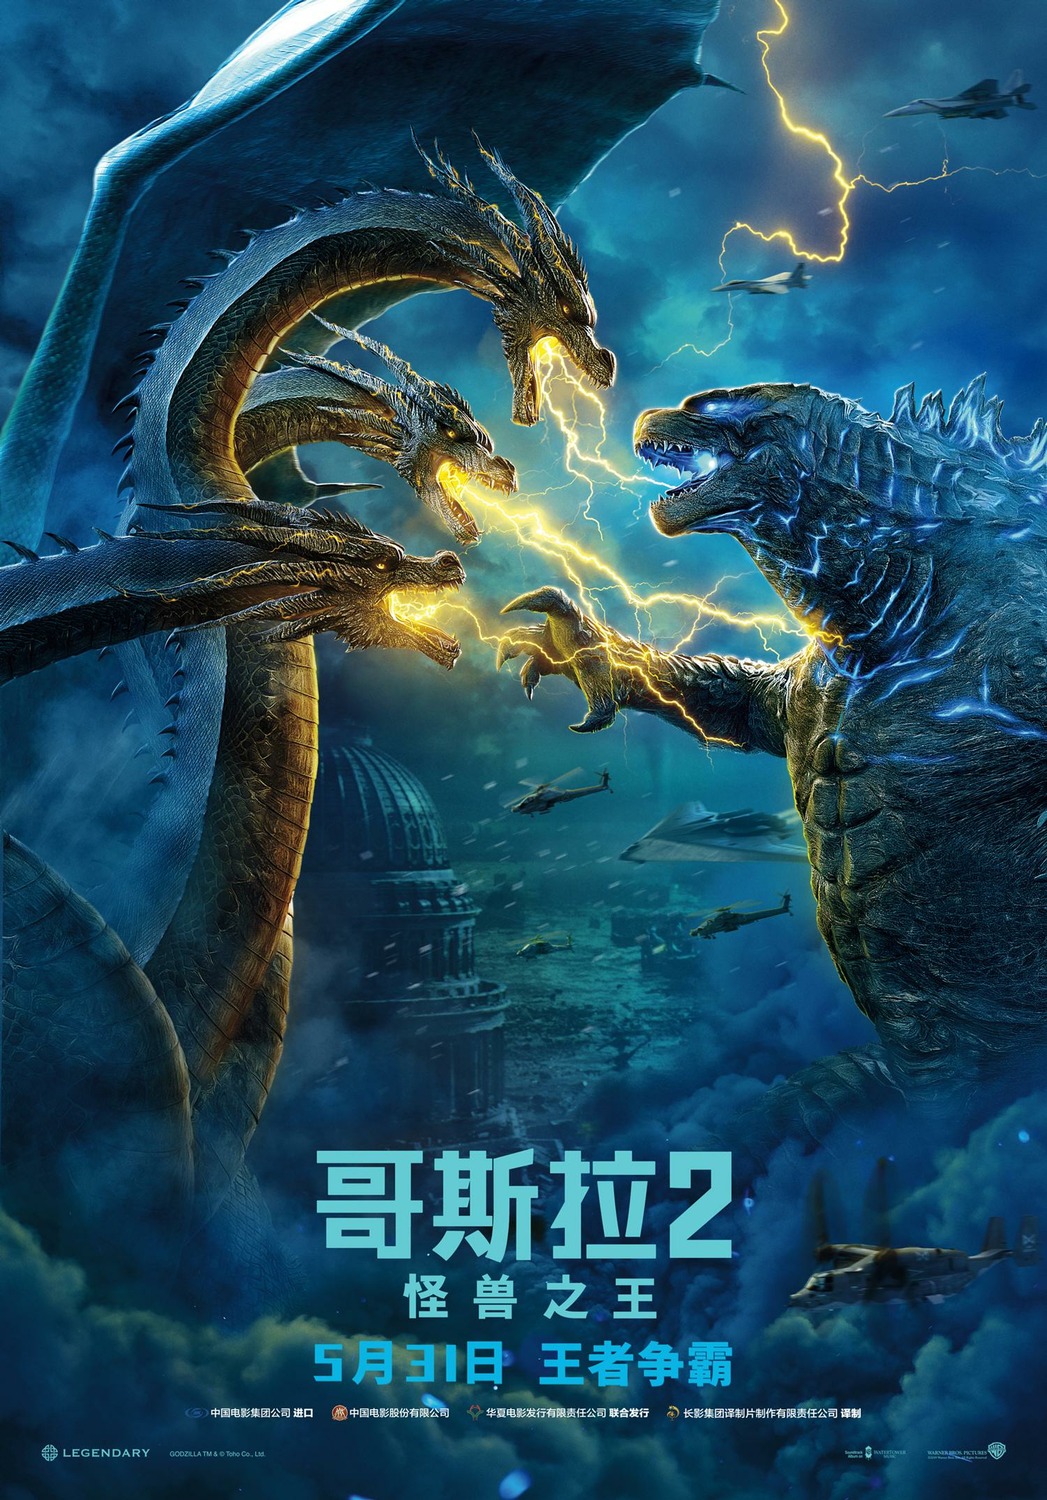 Extra Large Movie Poster Image for Godzilla: King of the Monsters (#10 of 27)